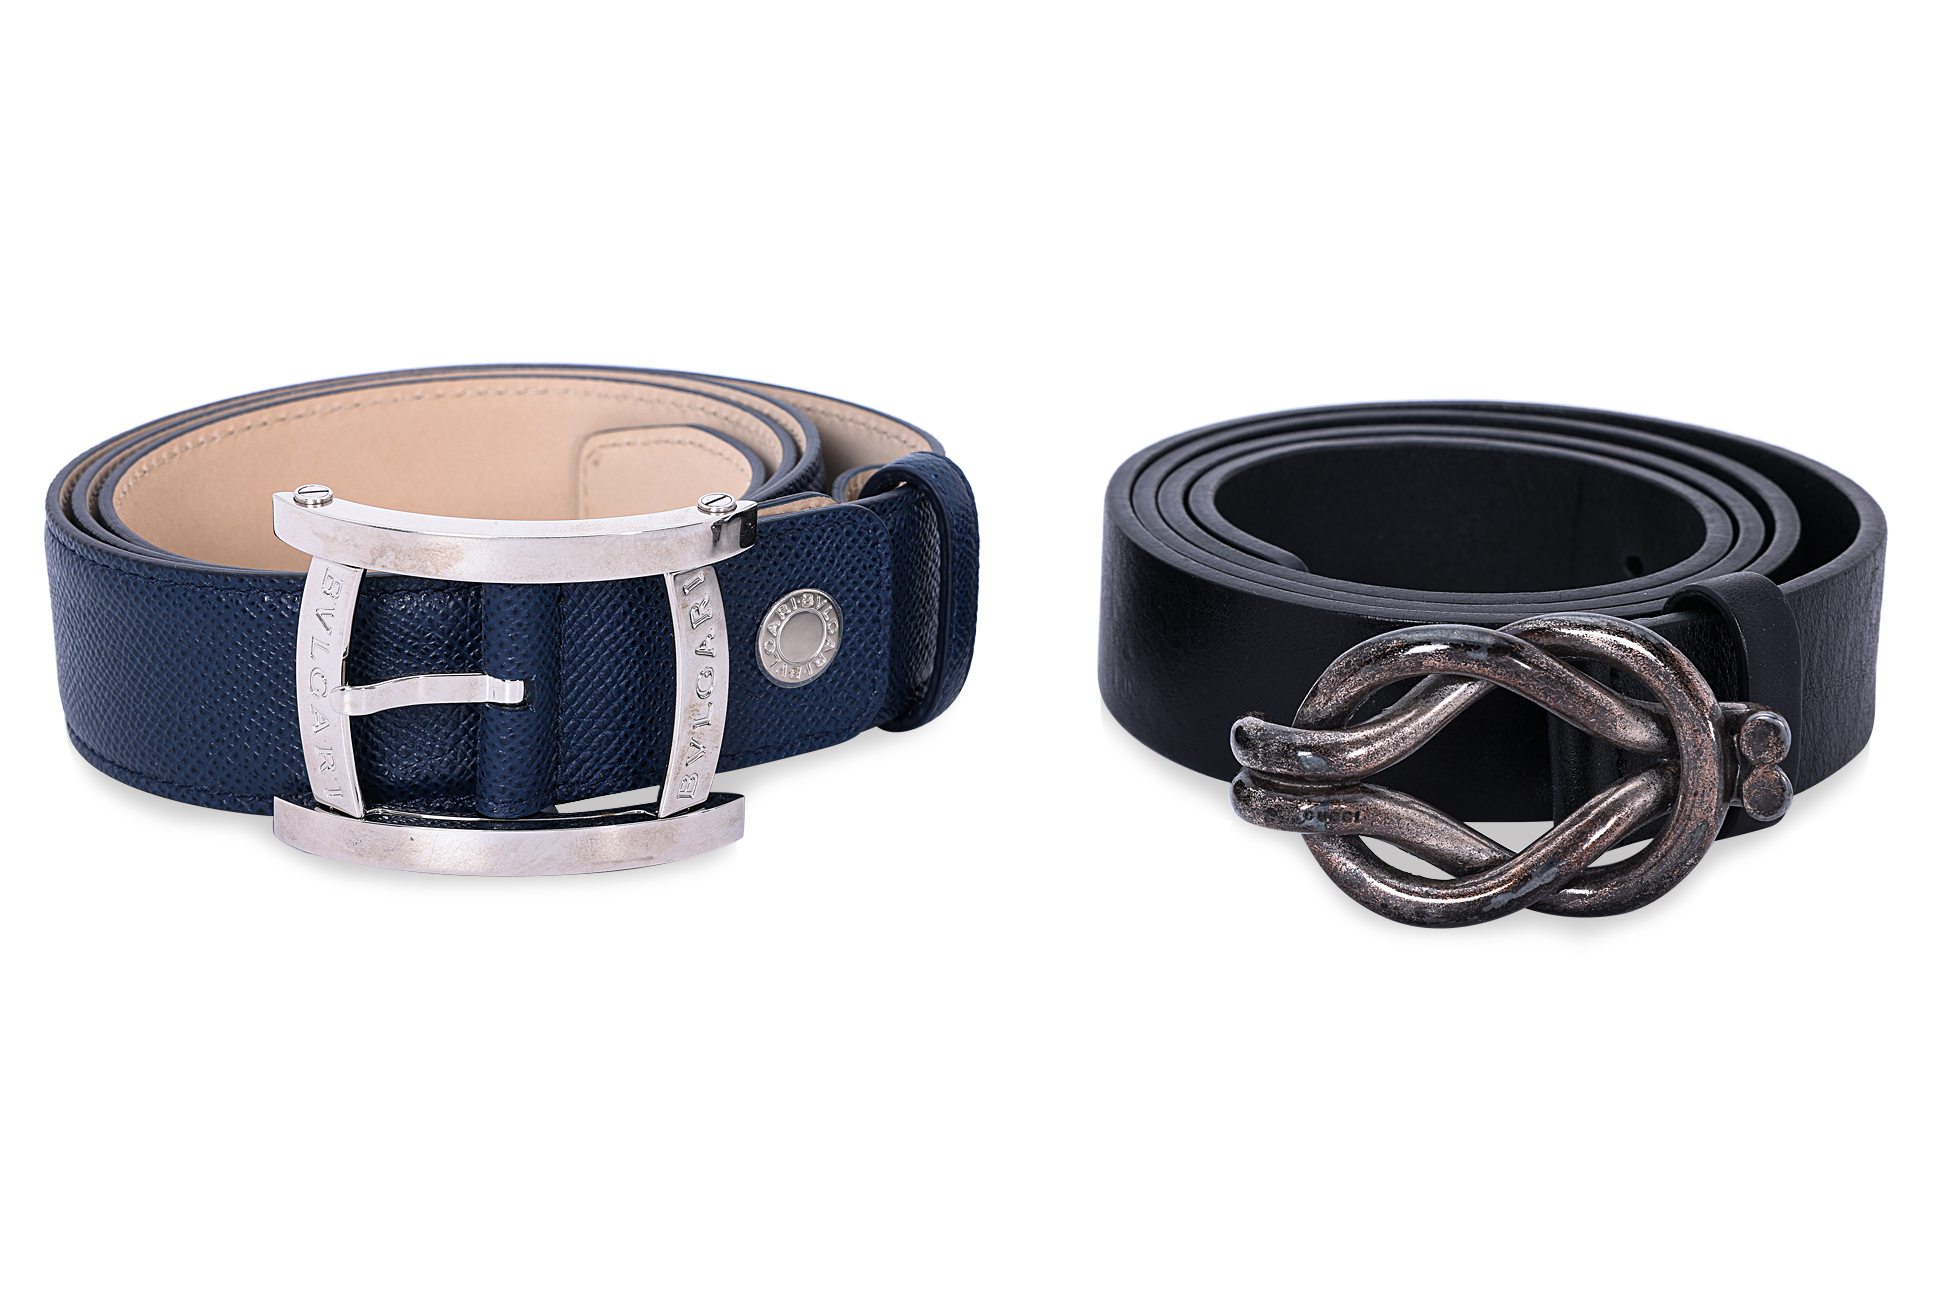 A GUCCI AND BVLGARI MEN'S LEATHER BELT